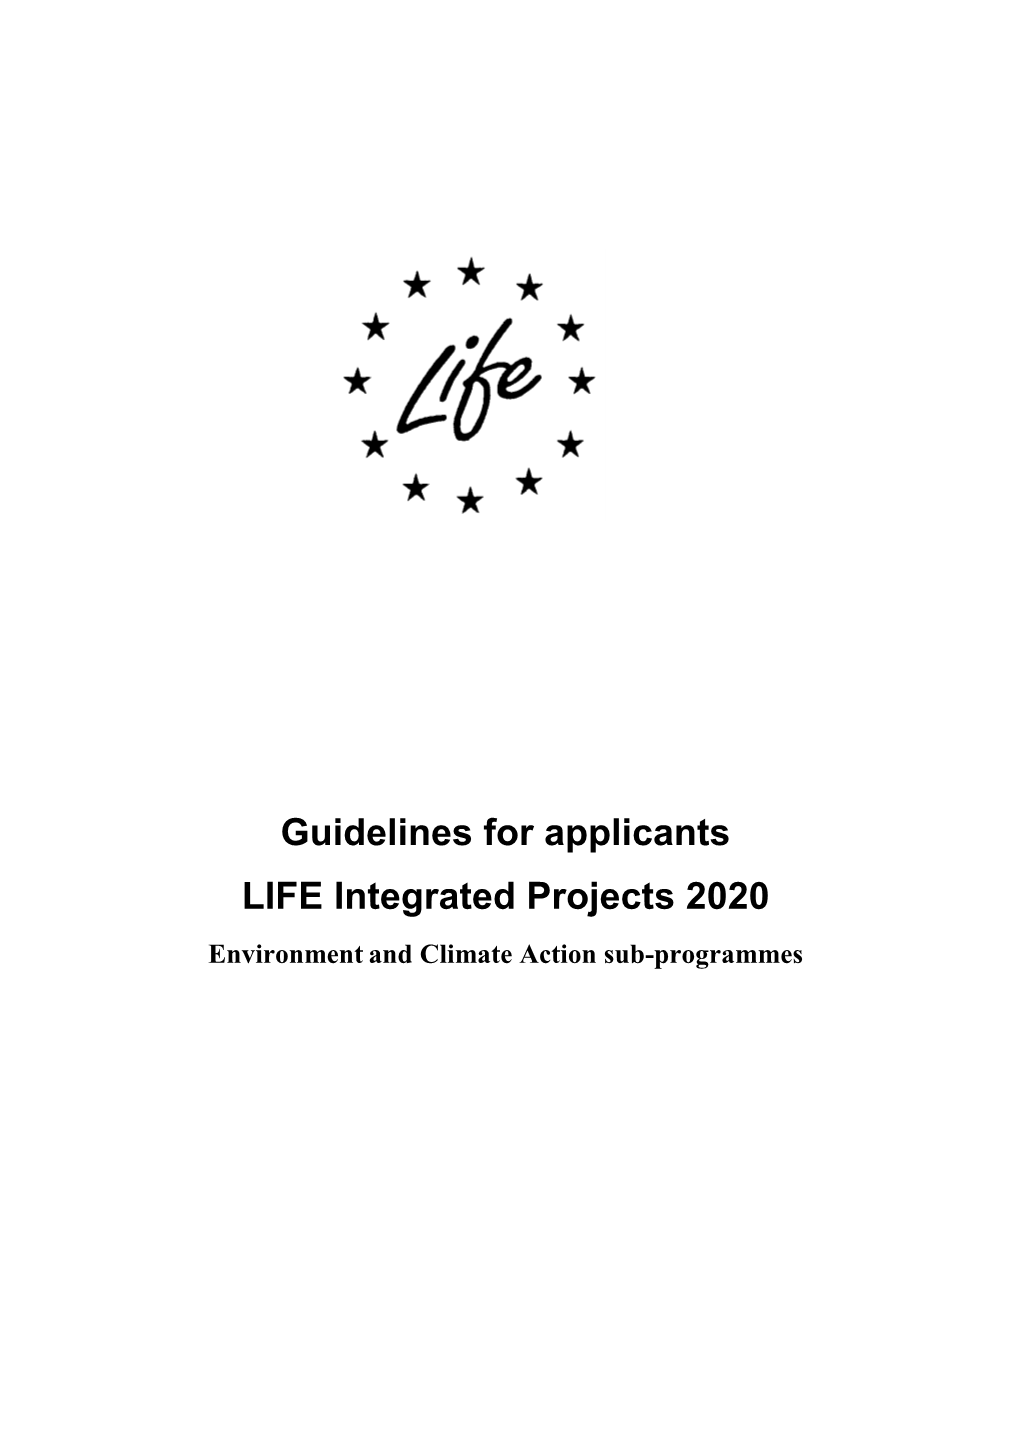 Guidelines for Applicants LIFE Integrated Projects 2020